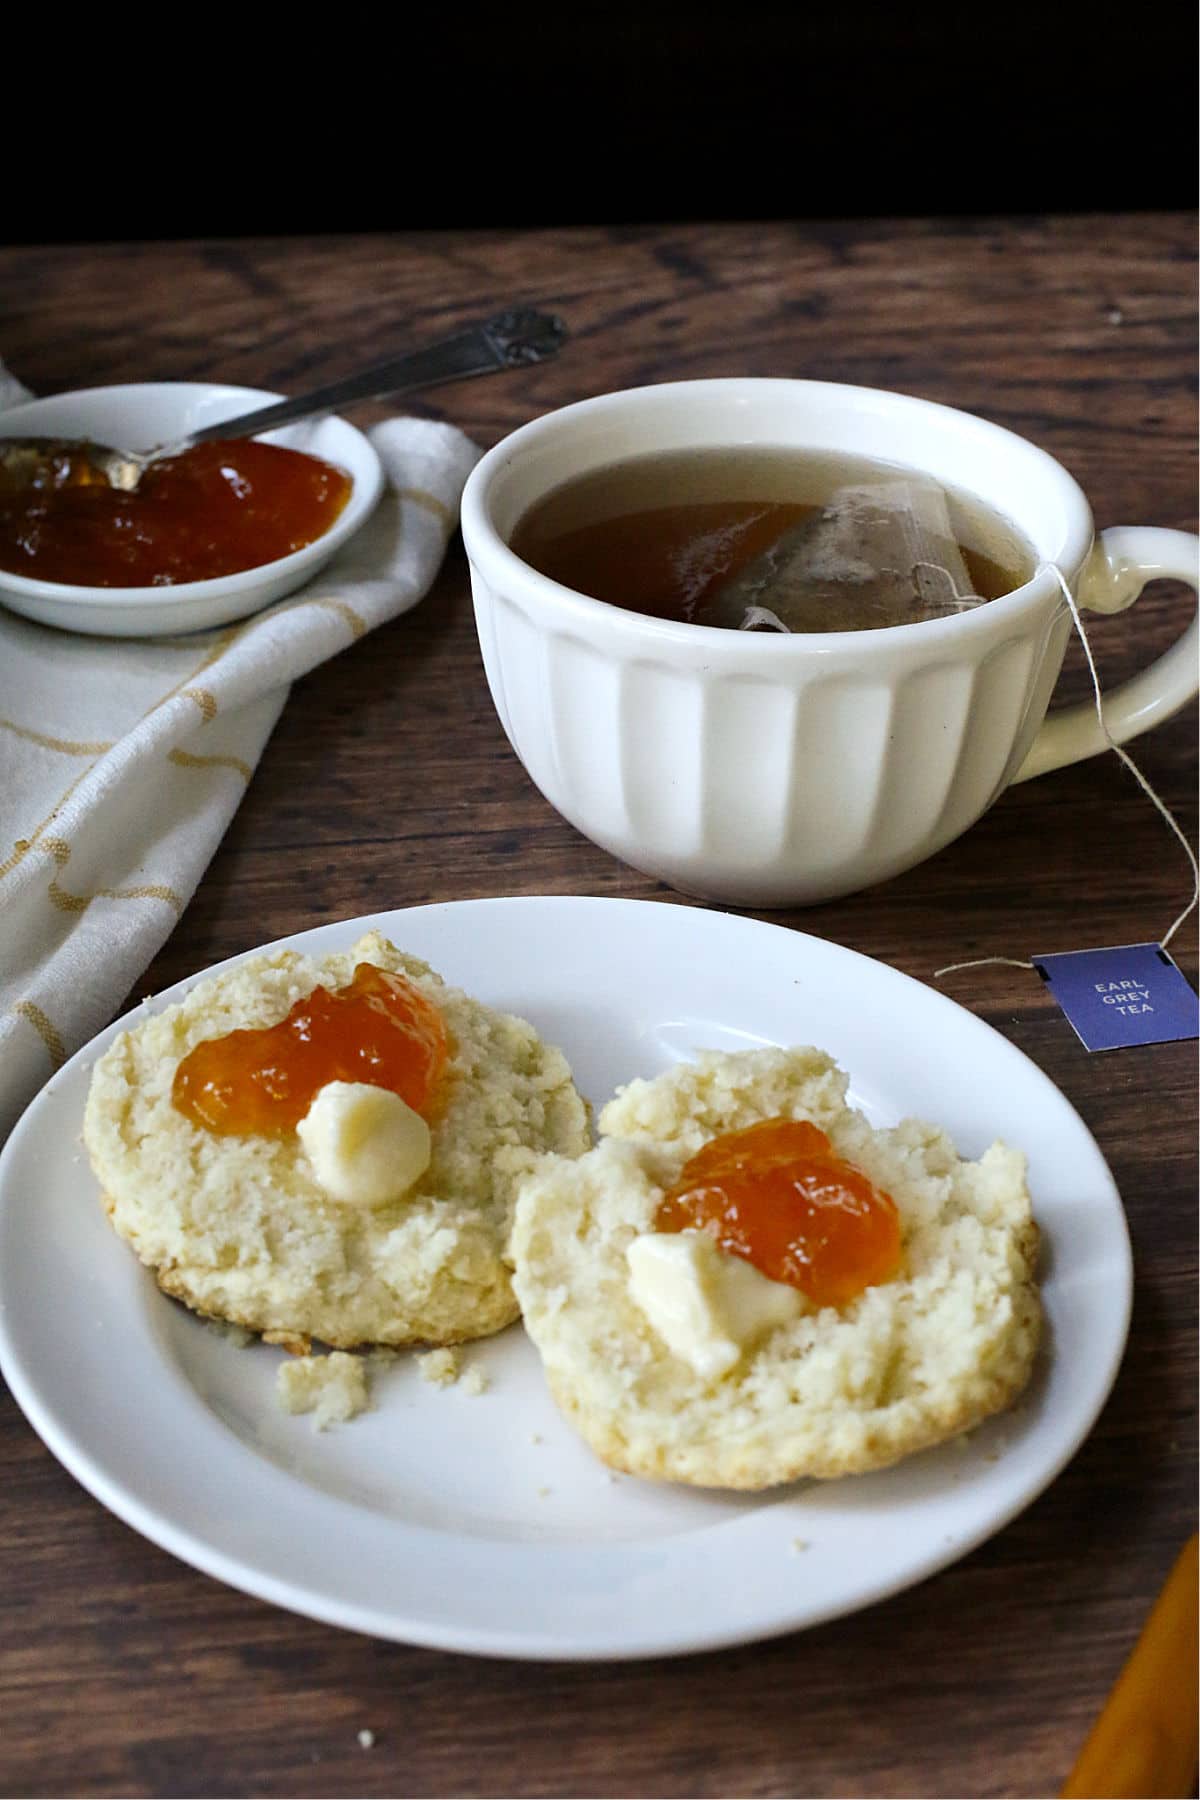 A cup of tea with biscuits with butter and jam.